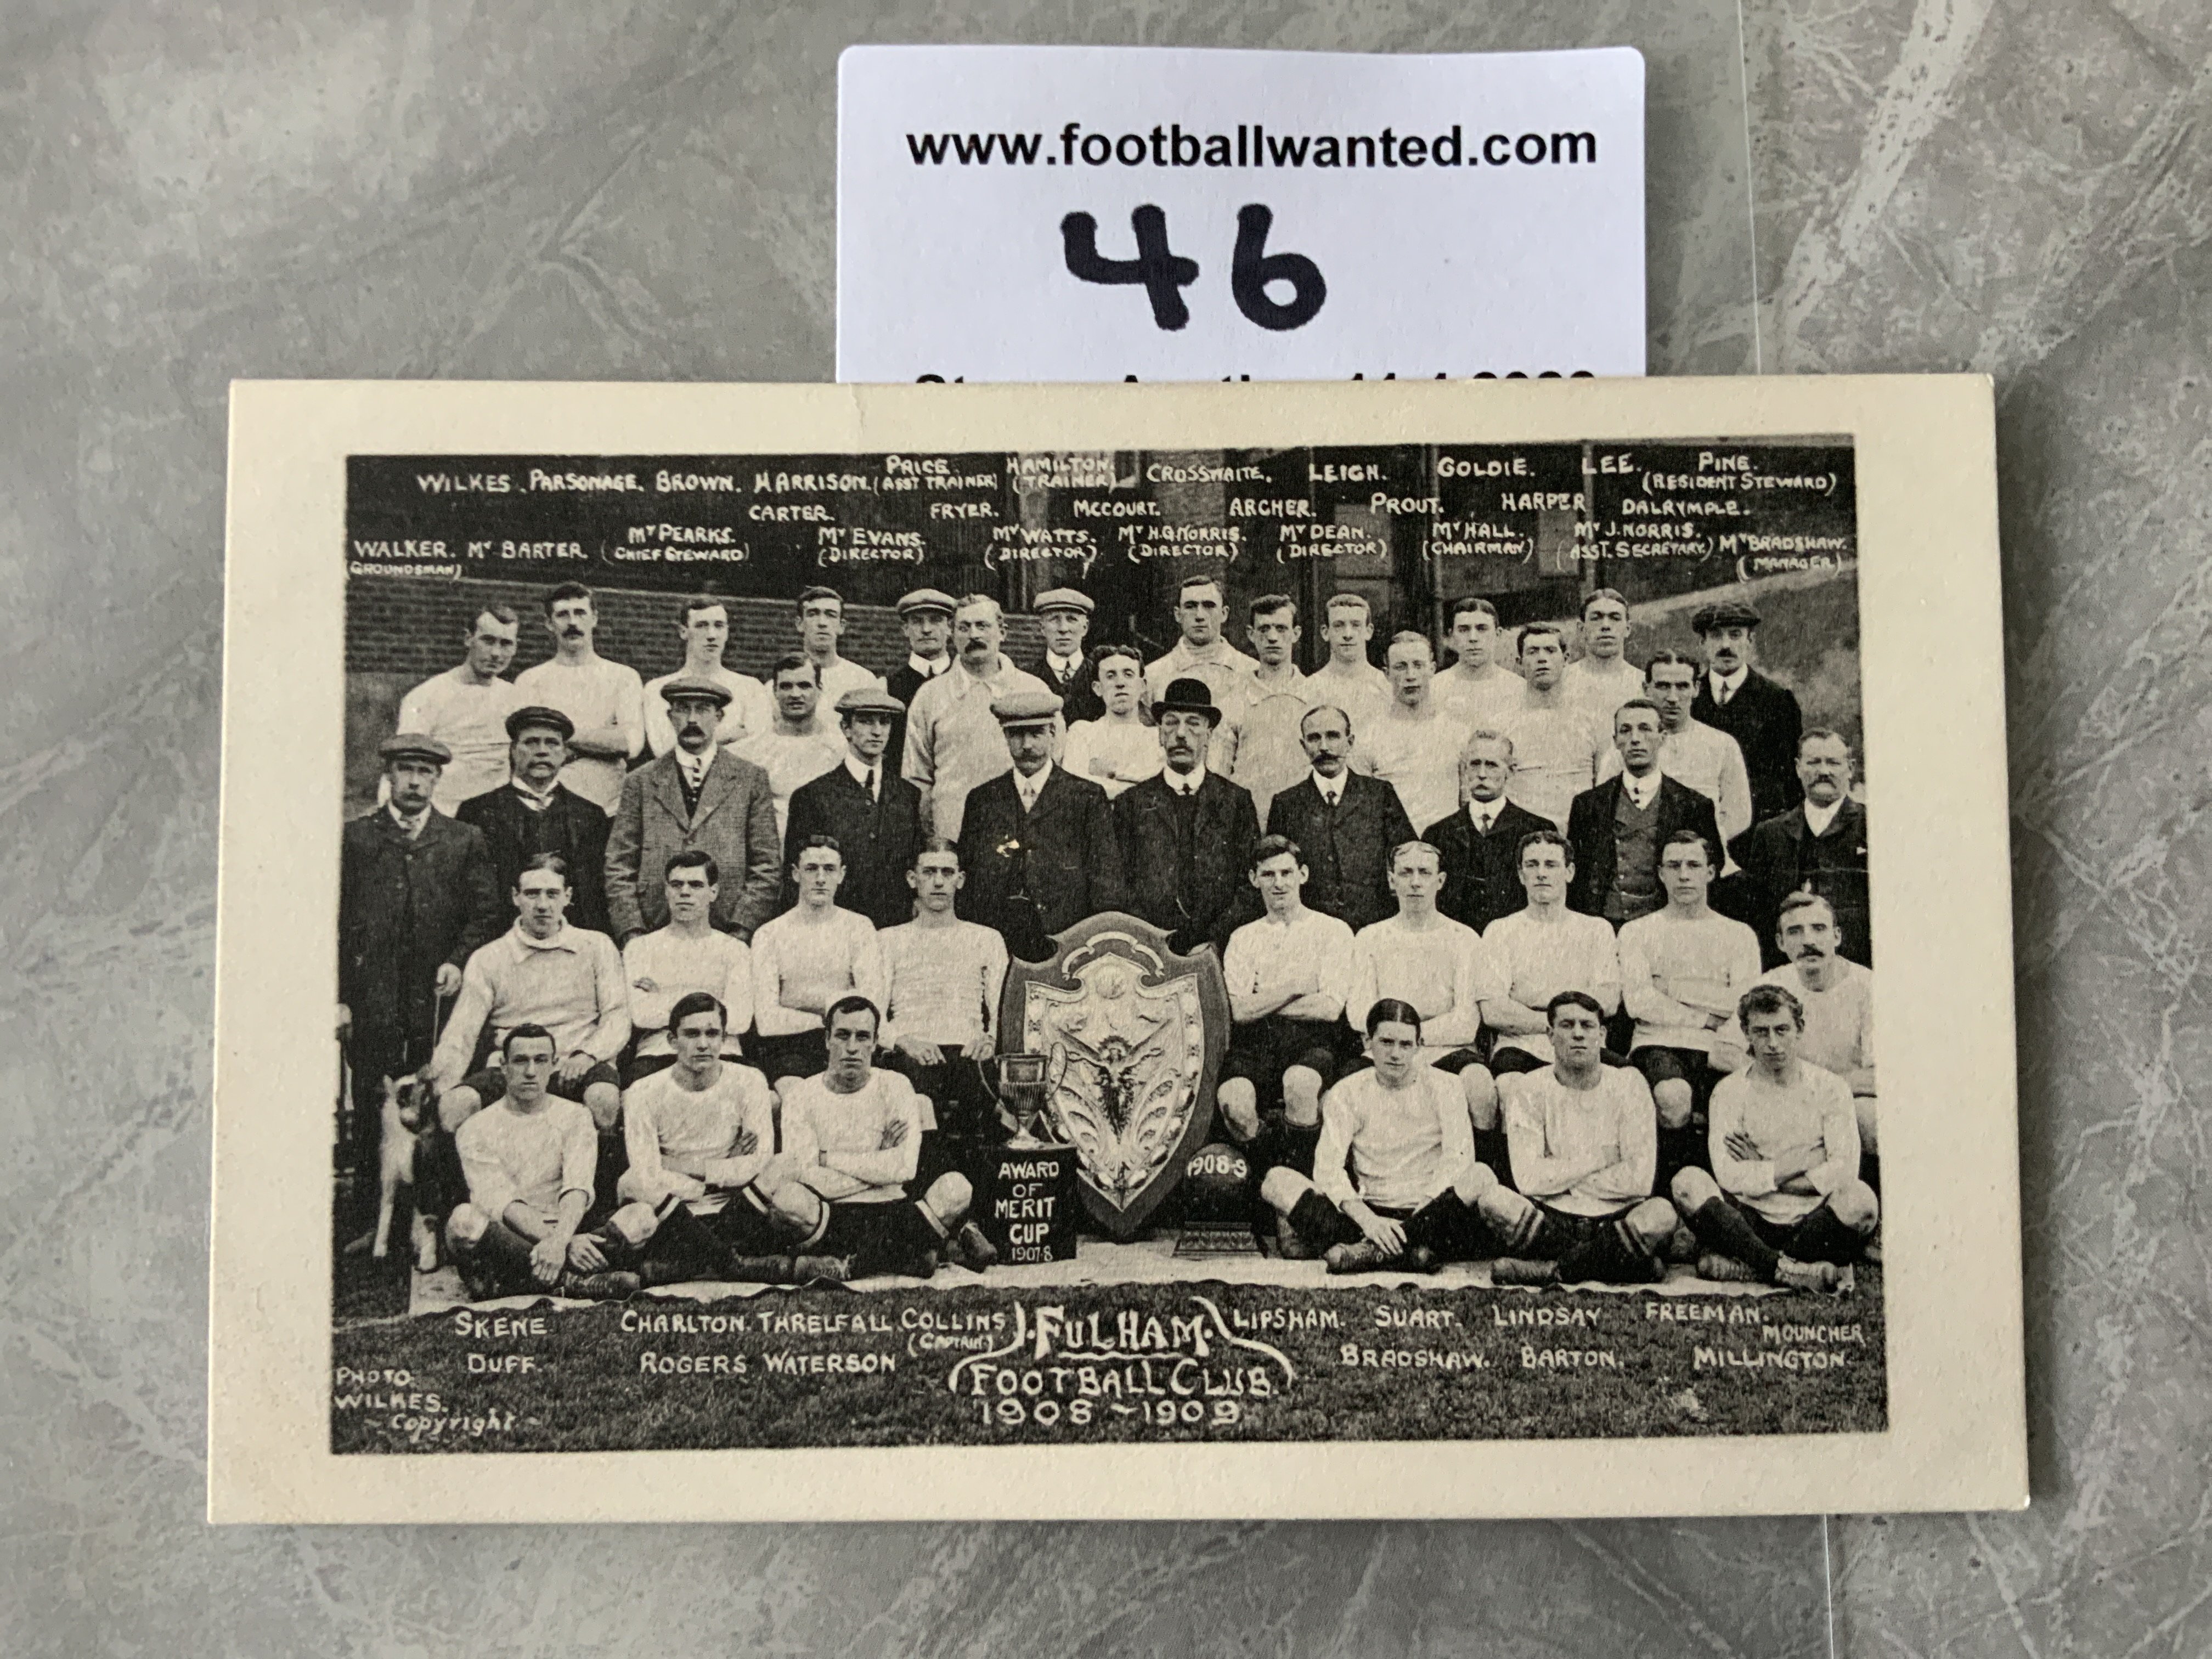 Fulham 1908/1909 Football Team Postcard: Excellent condition with no writing to rear.